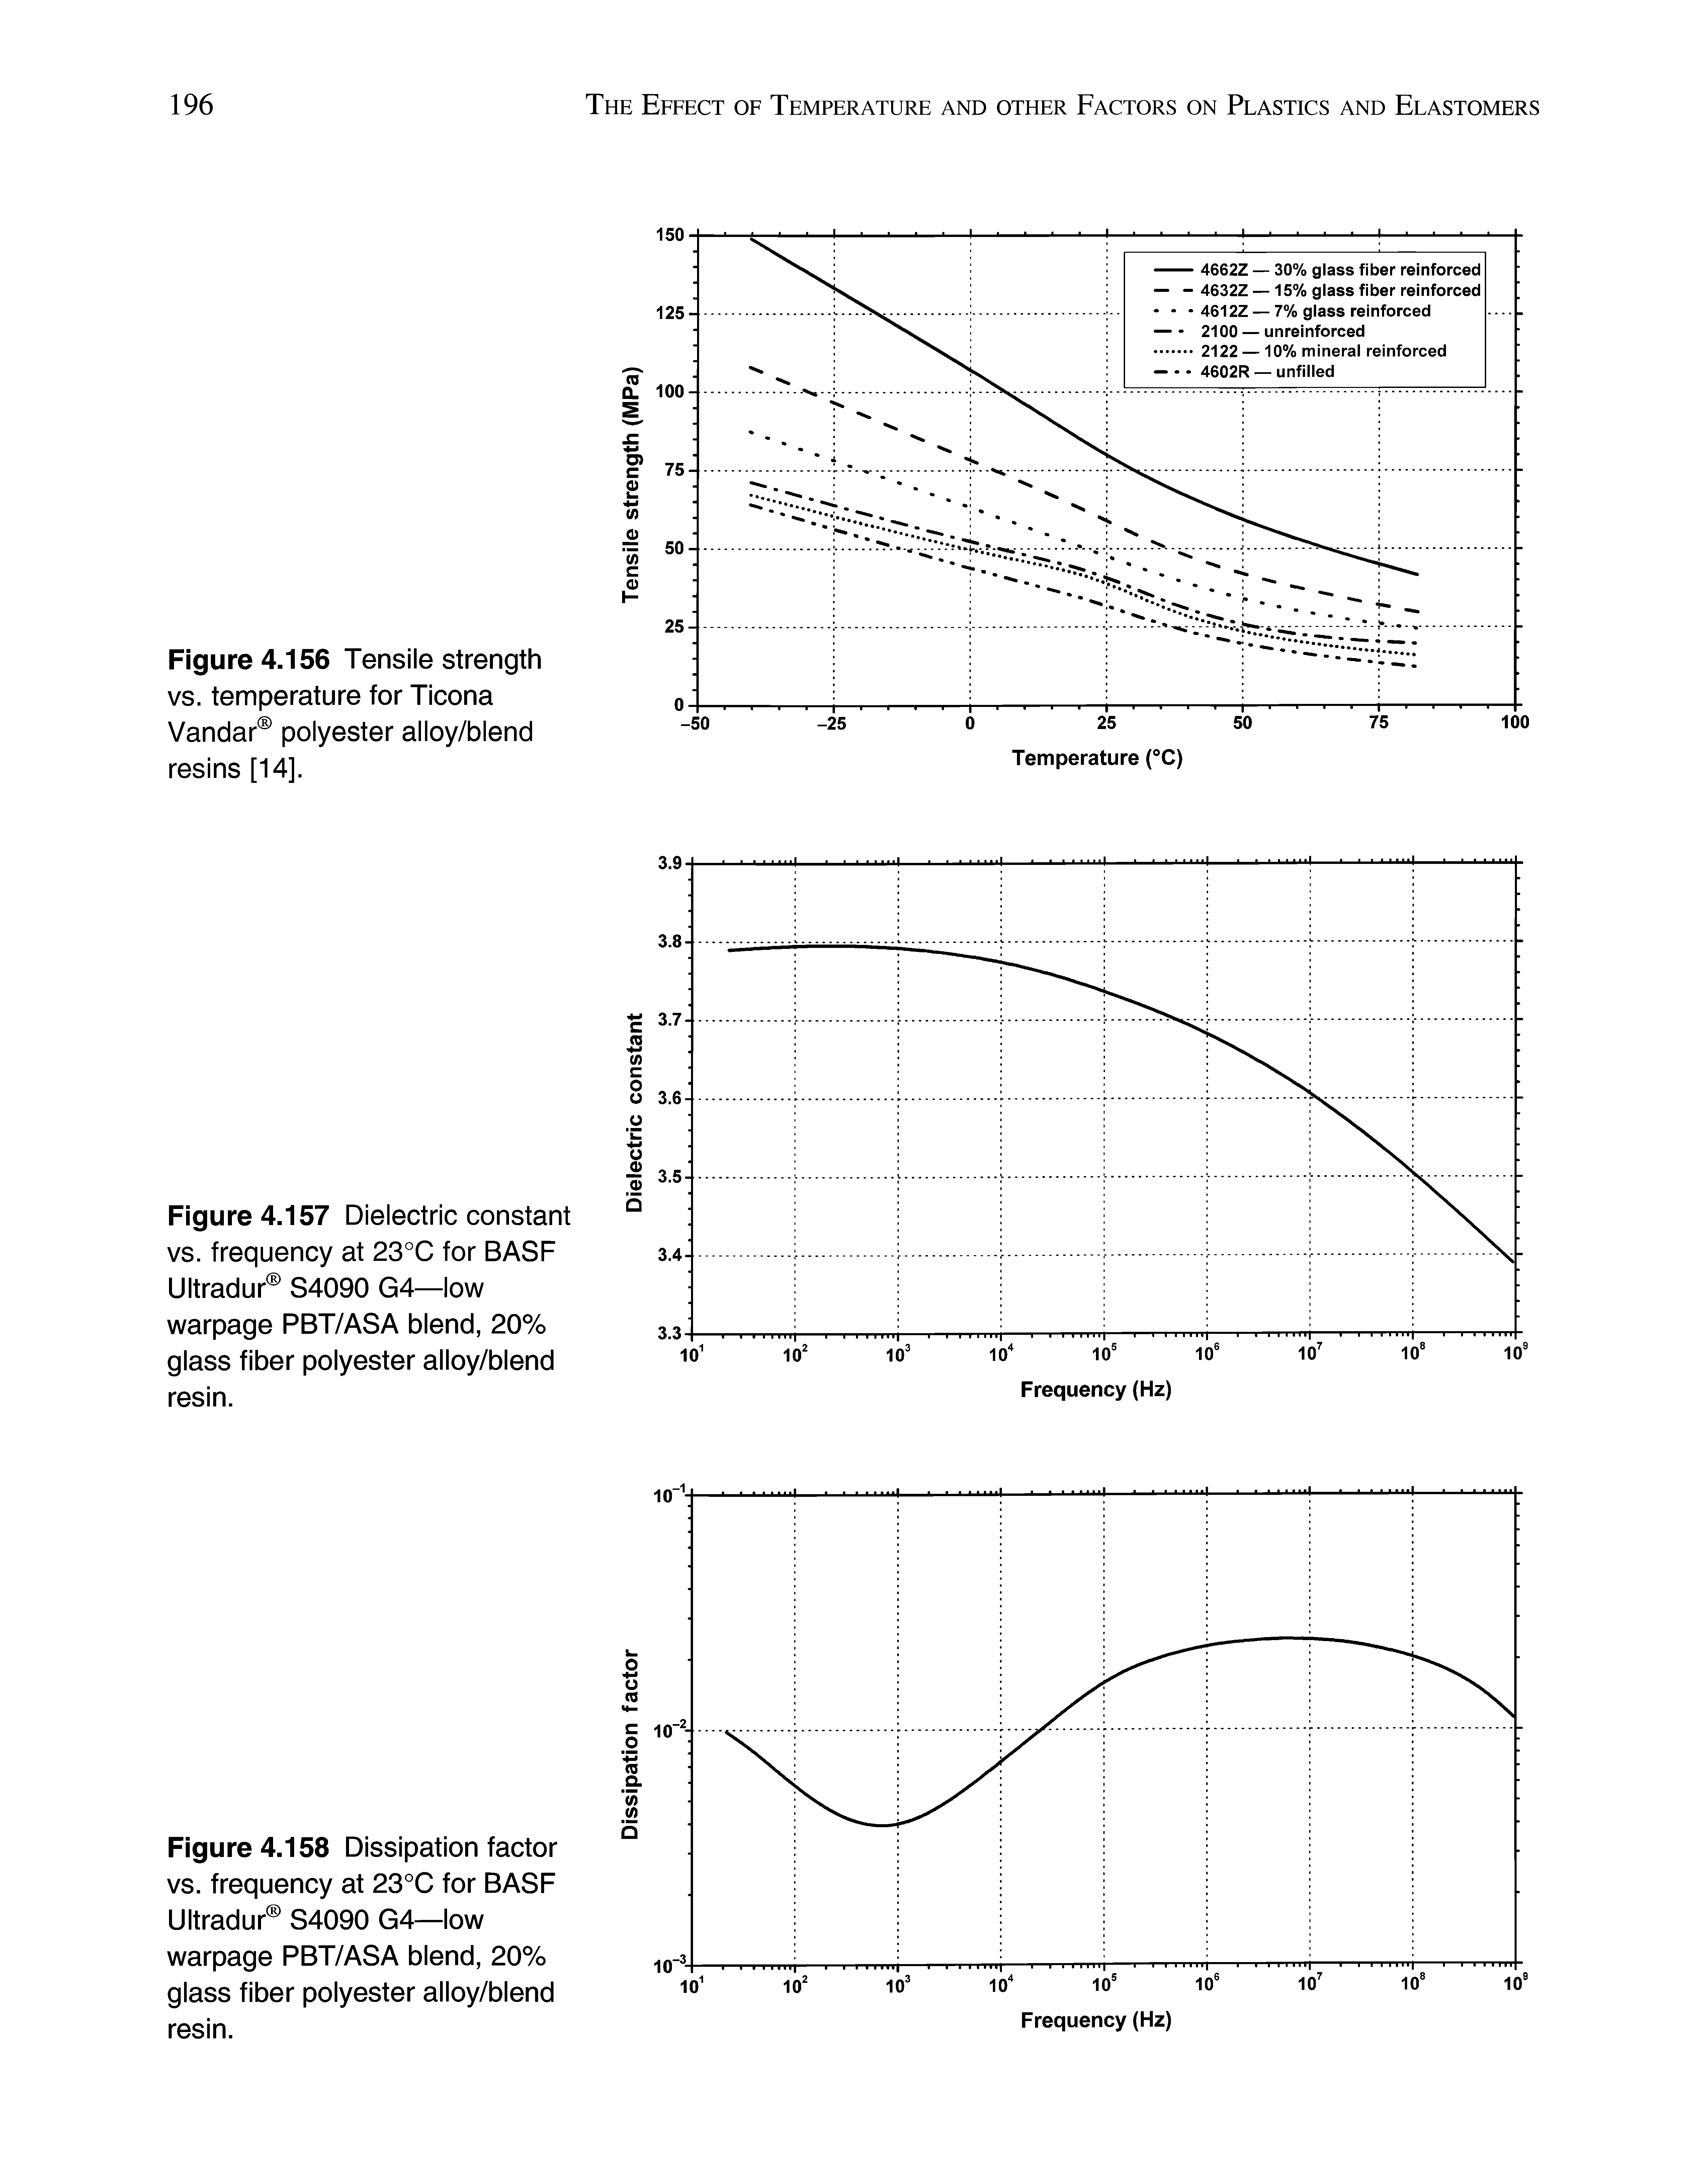 Figure 4.157 Dielectric constant vs. frequency at 23°C for BASF Ultradur S4090 G4—low warpage PBT/ASA blend, 20% glass fiber polyester alloy/blend resin.